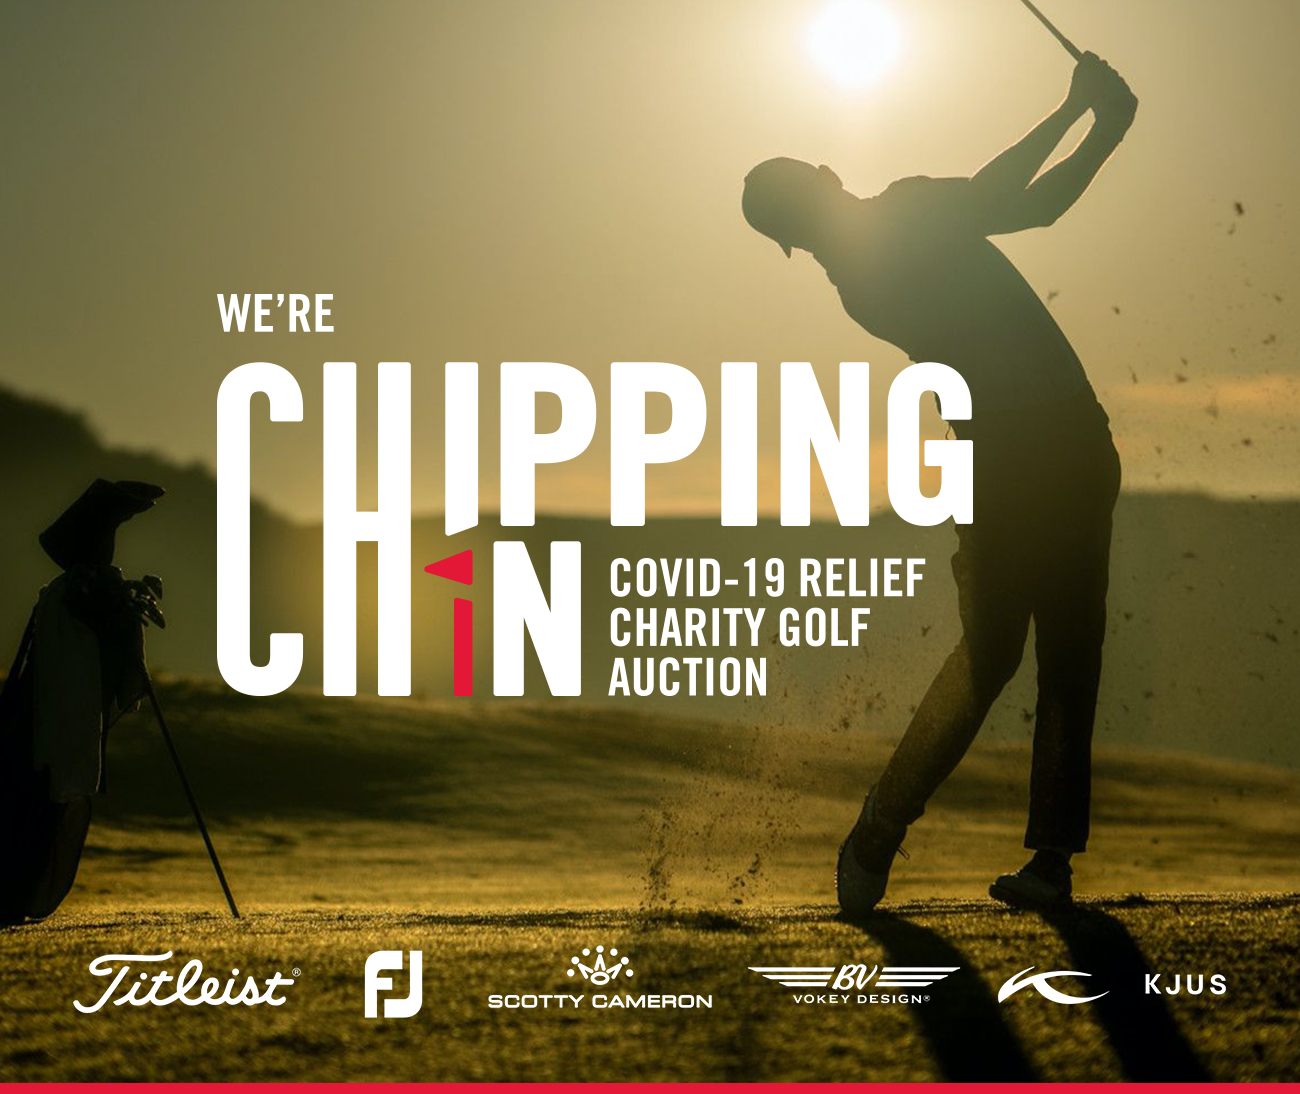 We''re Chipping In